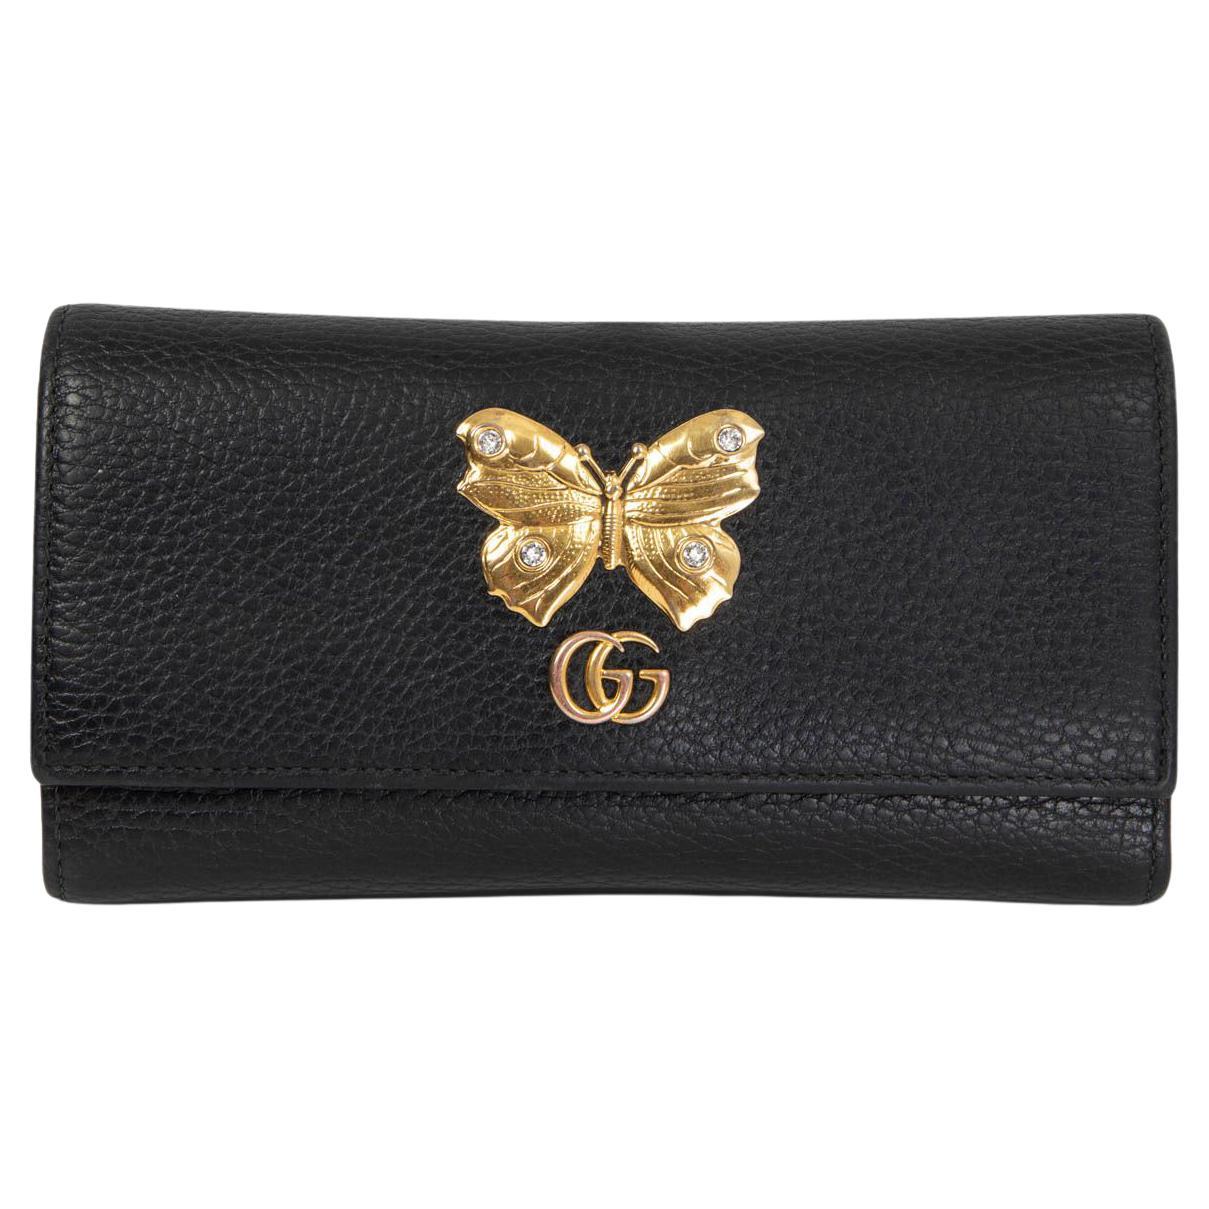 GUCCI black leather BUTTERFLY CONTINENTAL Wallet